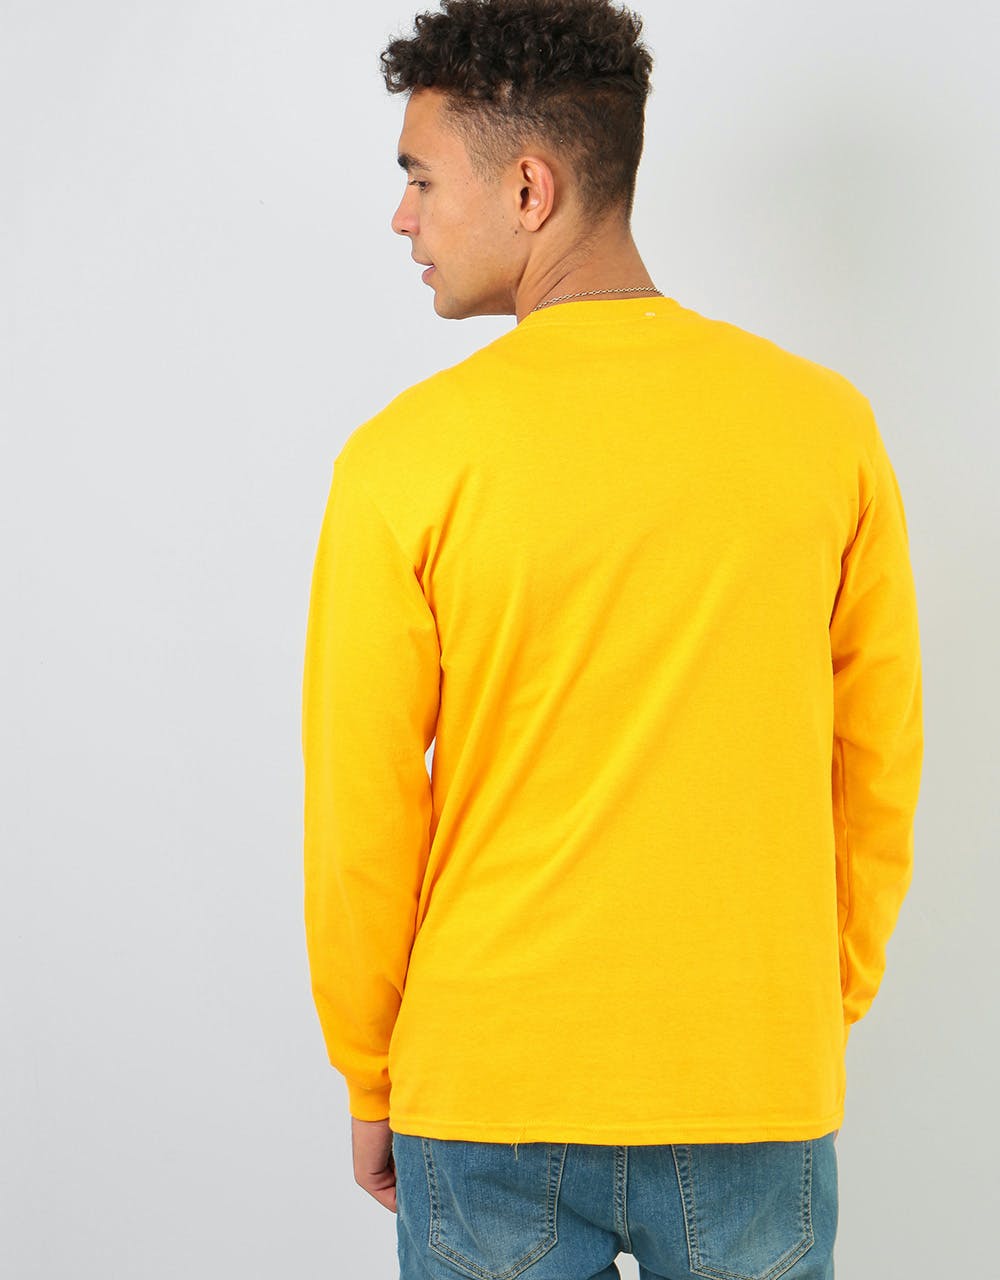 Route One Solidarity Long Sleeve T-Shirt - Gold